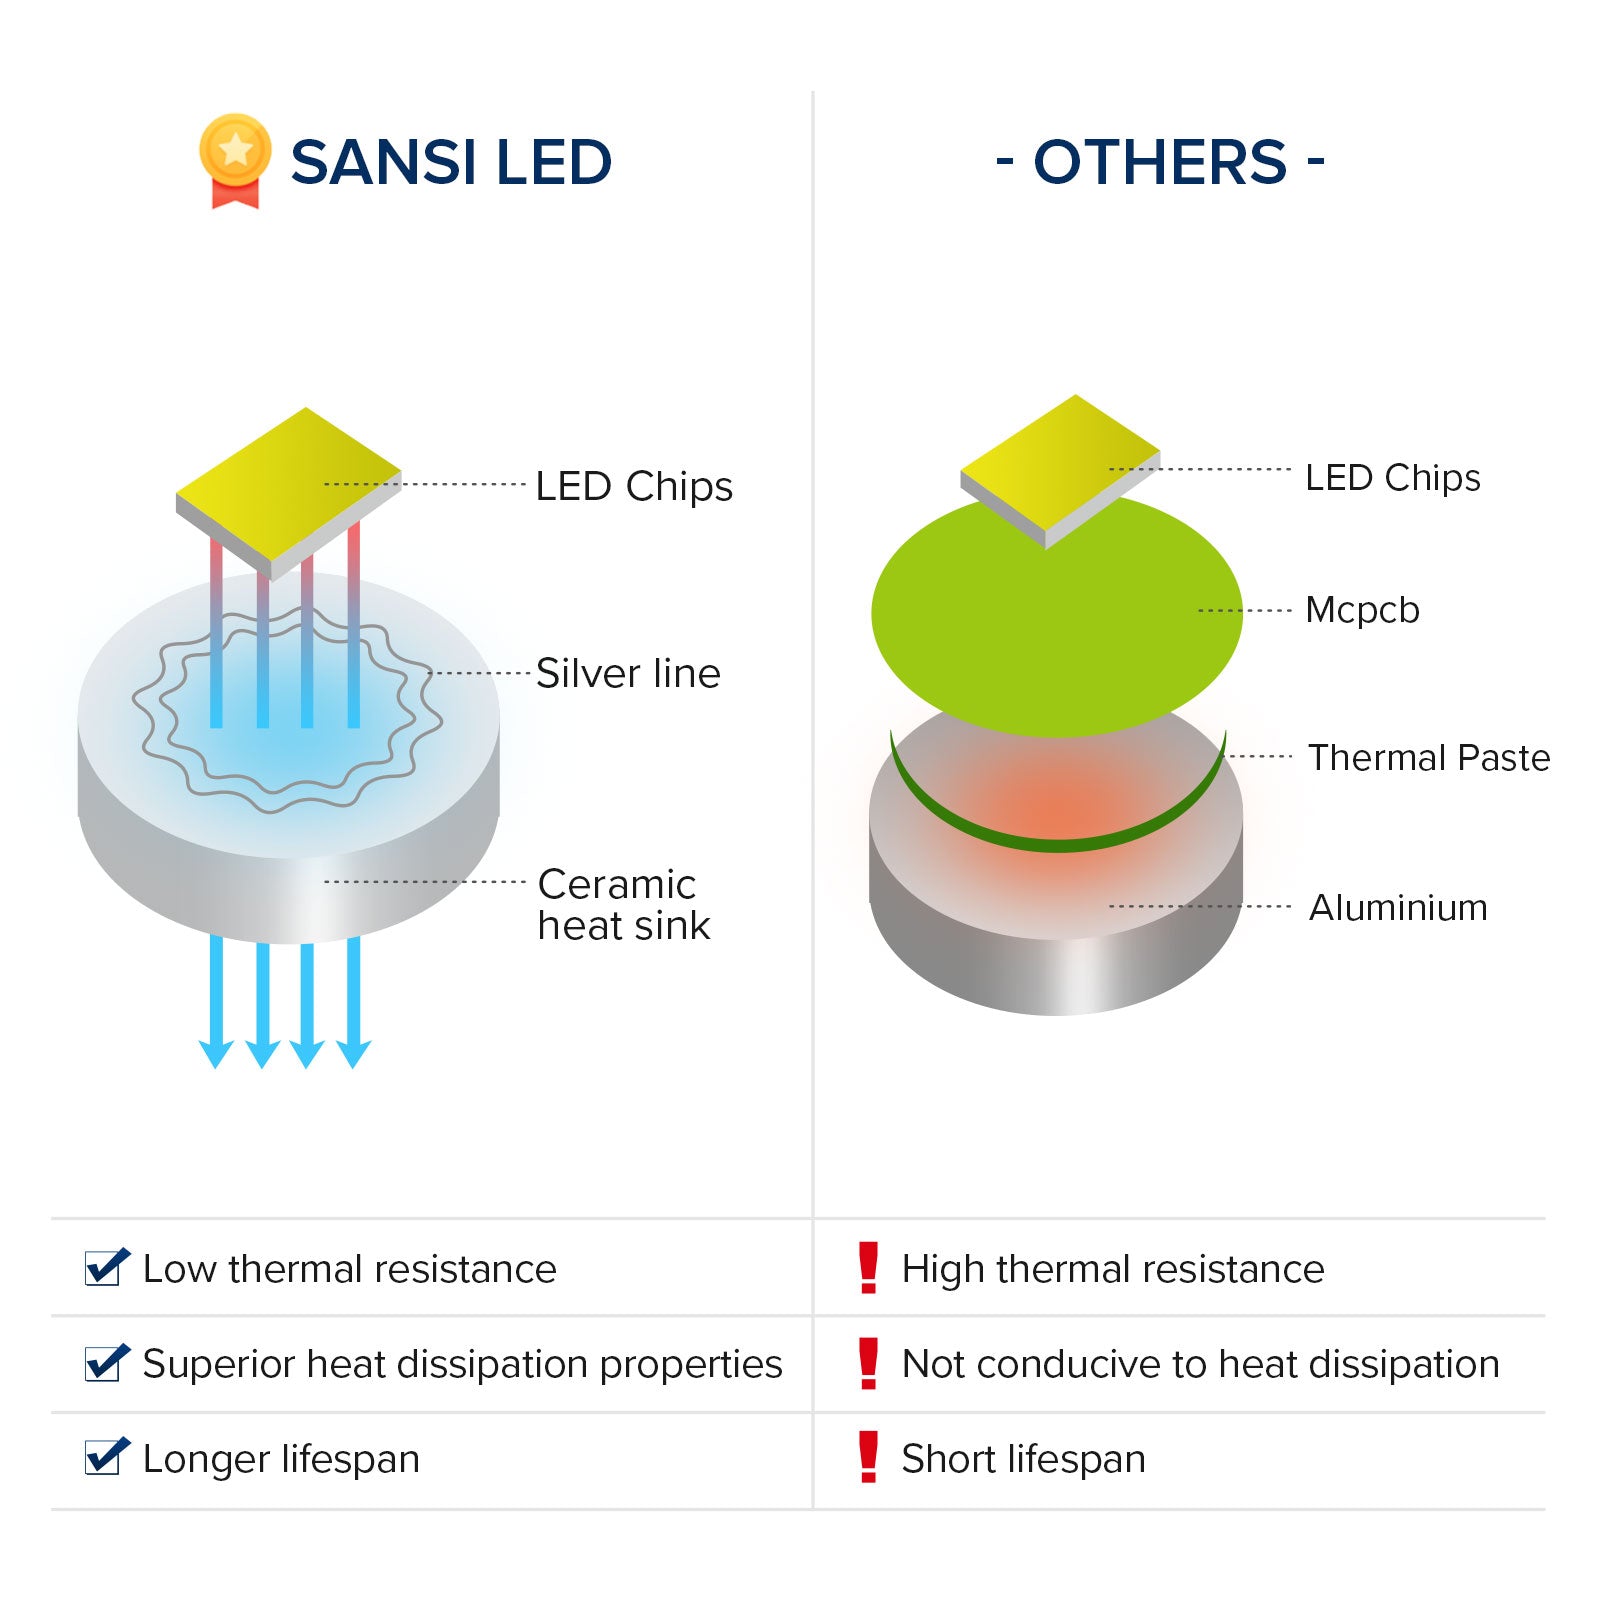  SANSI lightings are adopted SANSI Patented Ceramic Technology，Low thermal resistance，superior heat dissipation properties and longer lifespan.